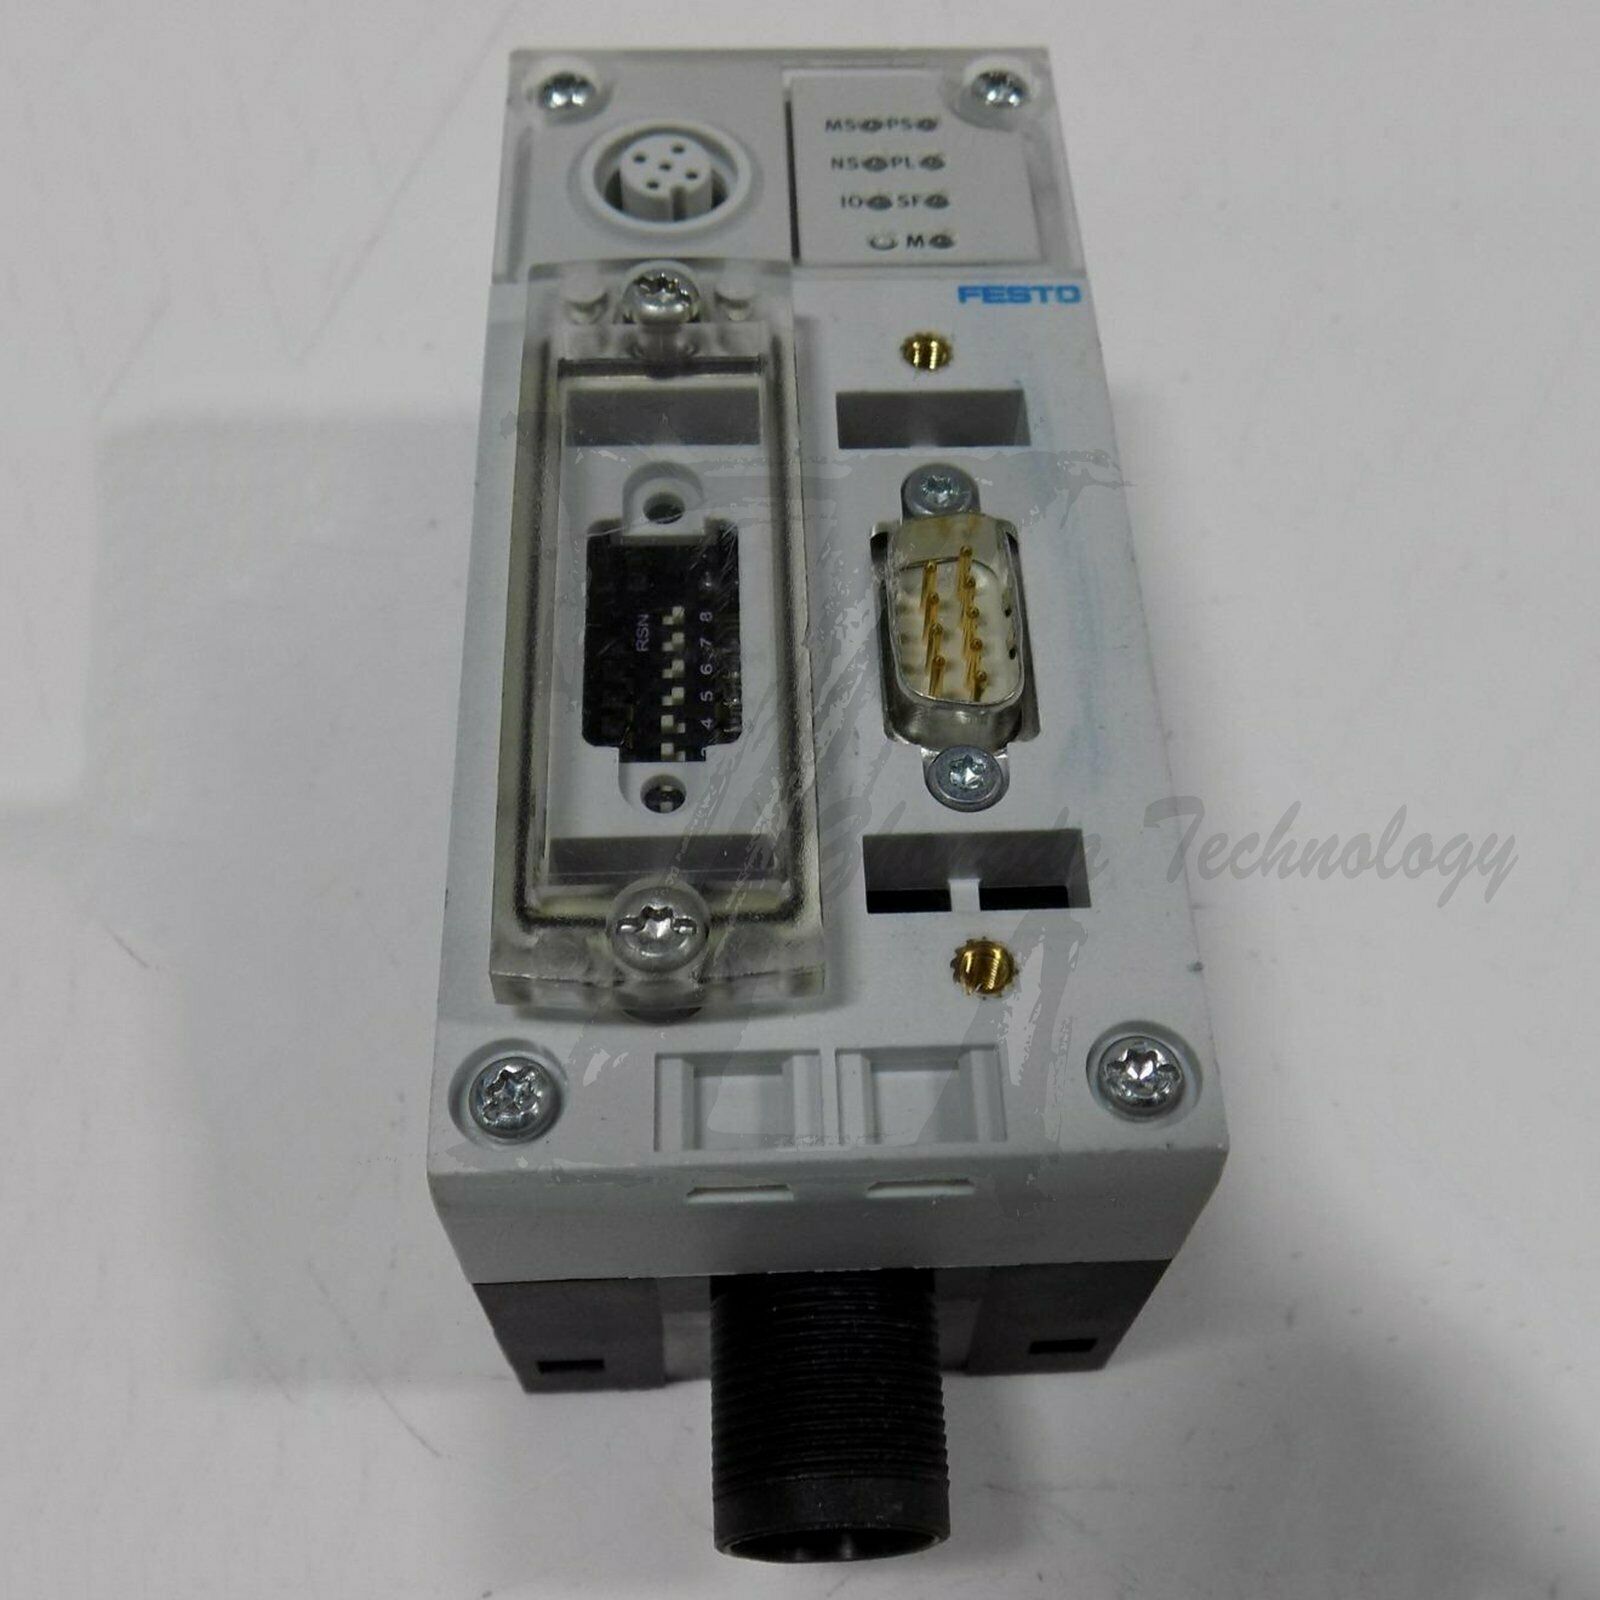 1PC new Festo controller CPX-FB11 (526172) KOEED 500+, 80%, FESTO, import_2020_10_10_031751, Other